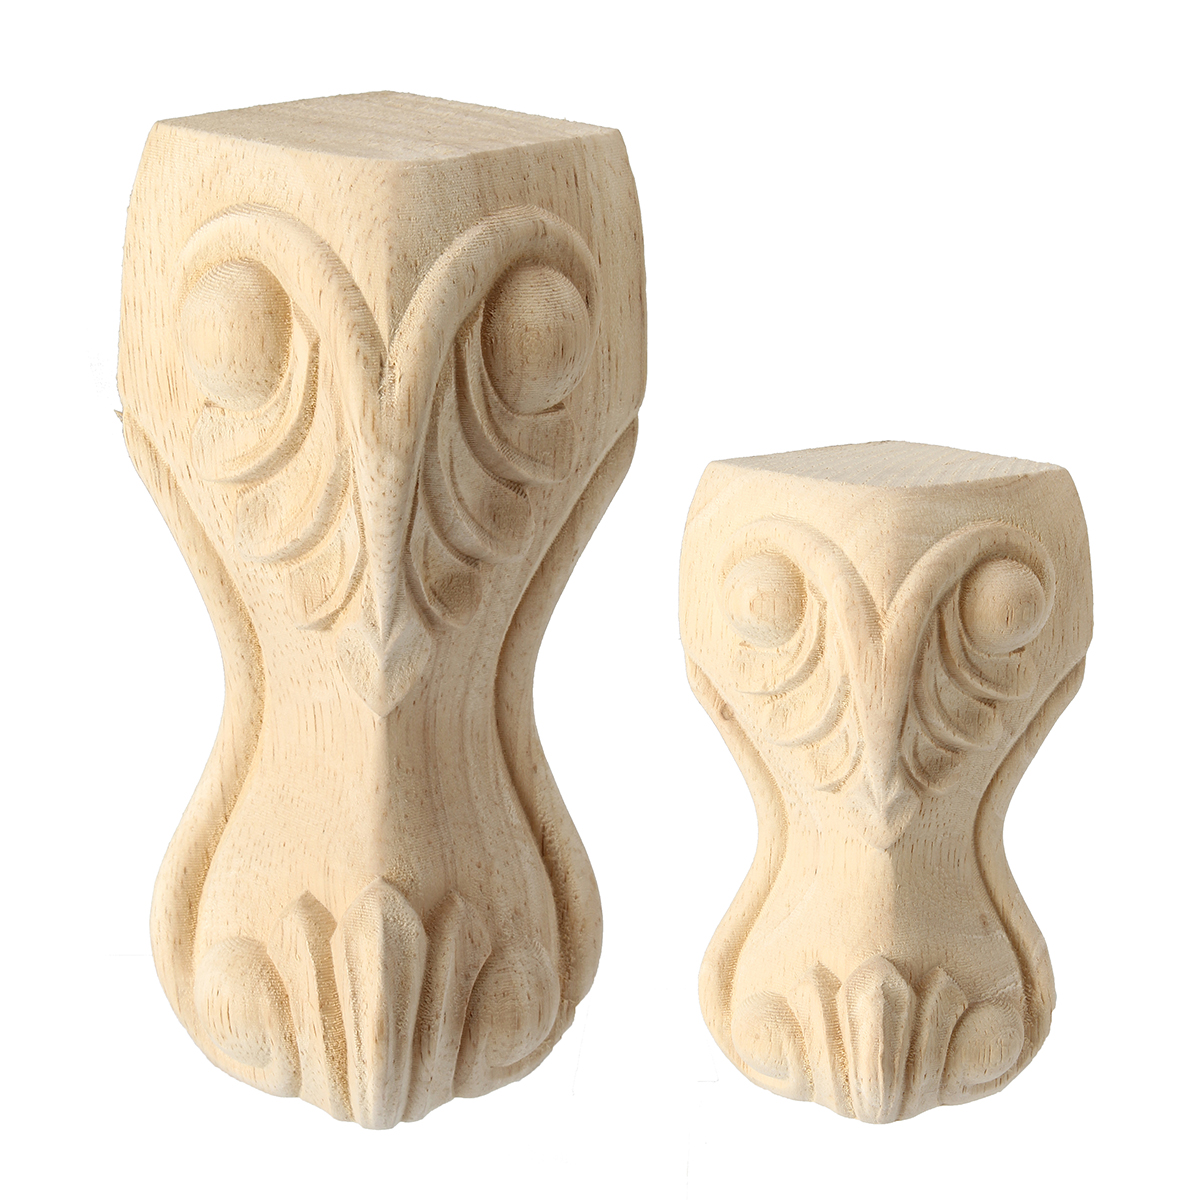 4Pcs-1015cm-European-Solid-Wood-Carving-Furniture-Foot-Legs-Unpainted-Table-Cabinet-Feets-1322663-1